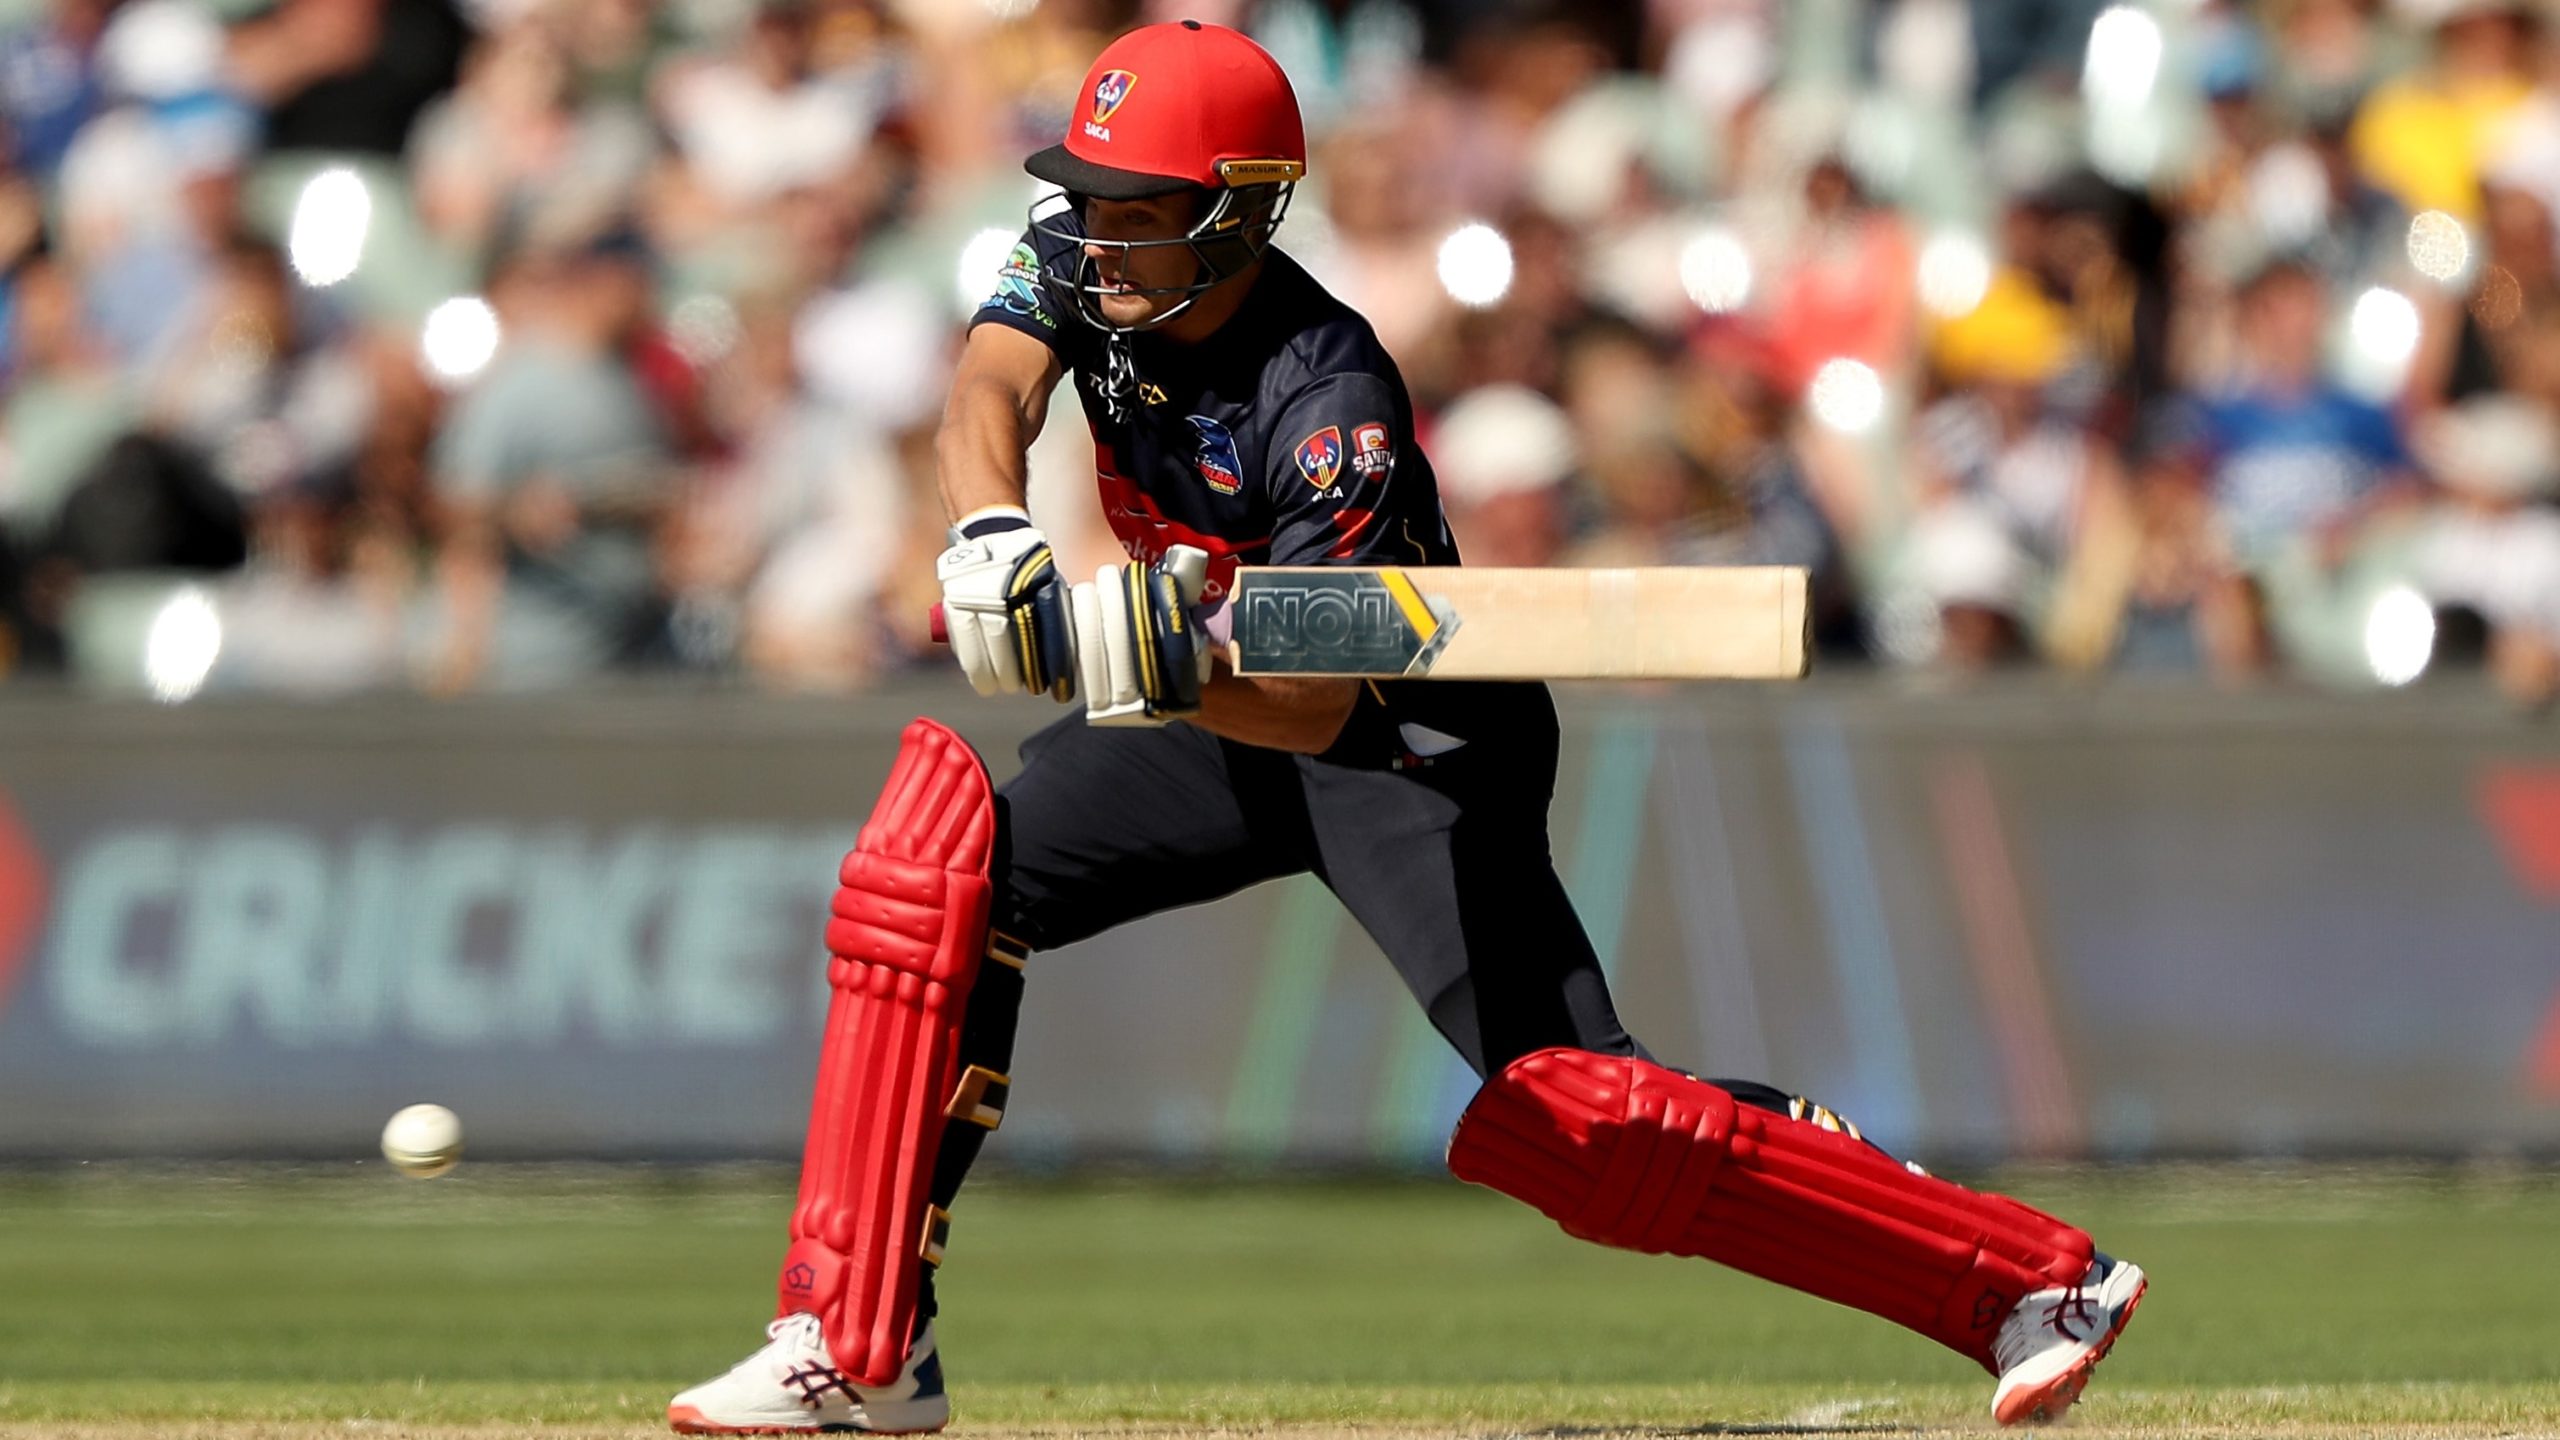 Cricket and football, hand in glove | AFL Players' Association Limited